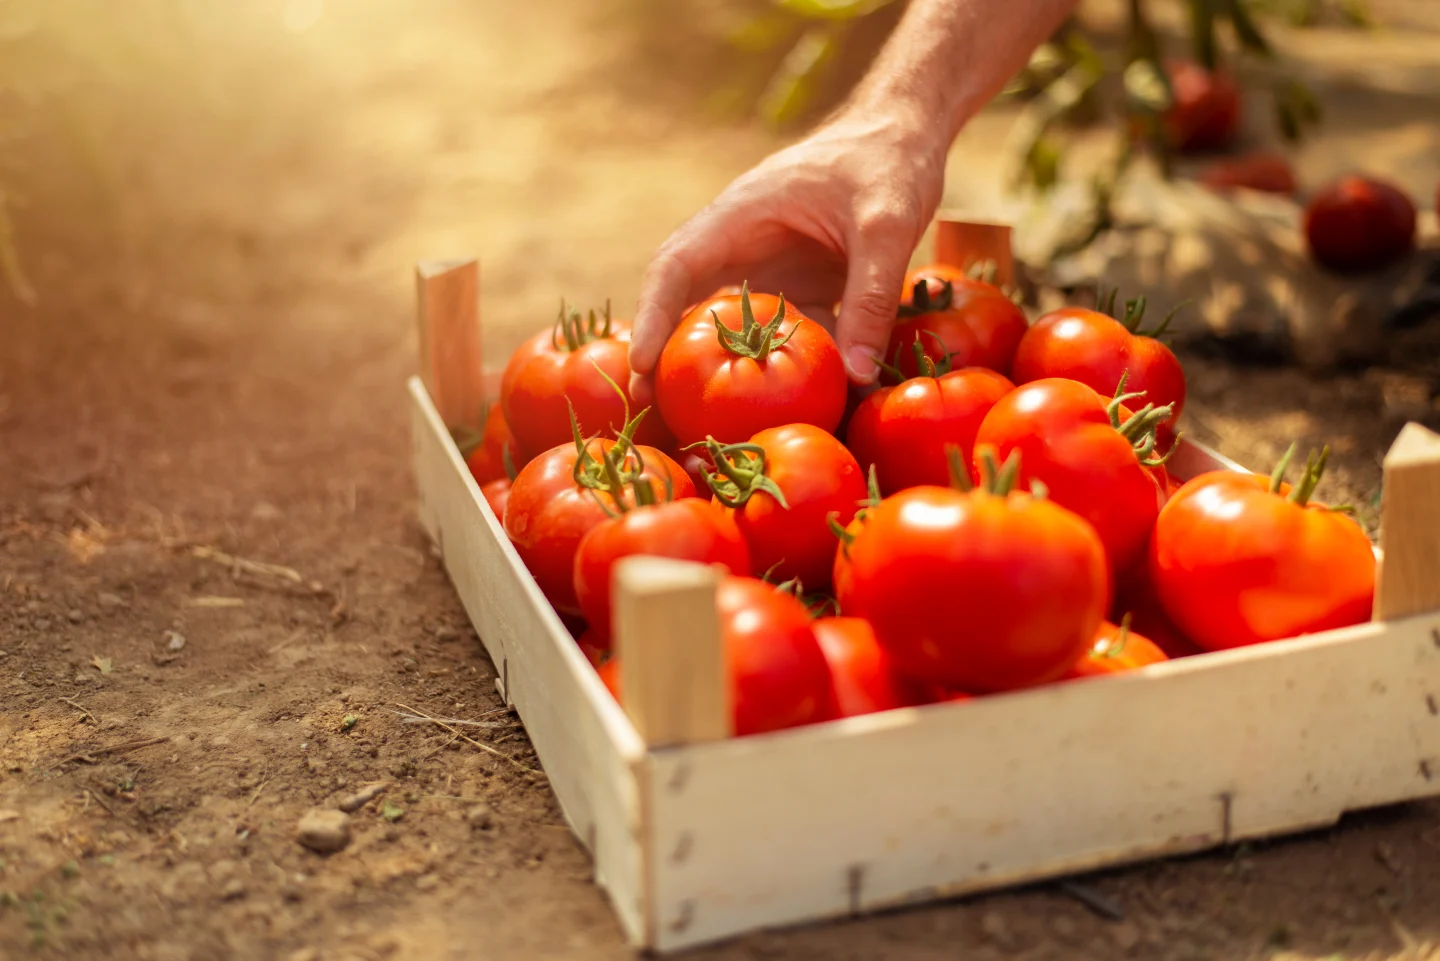 freshly-picked-organic-red-tomato-picture-id1158910292